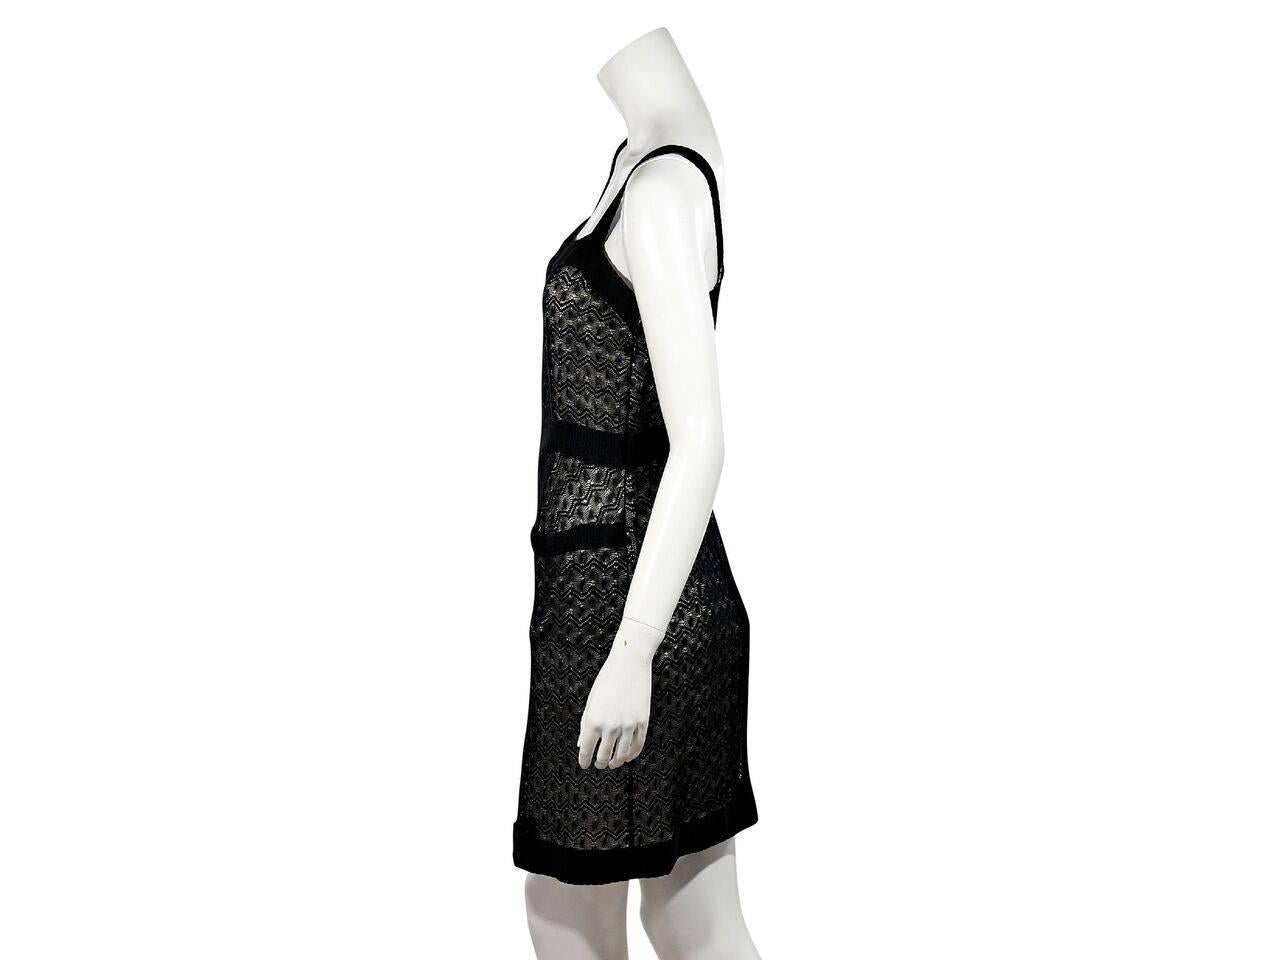 Product details:  Black knit dress by Missoni.  Accented with sequins.  Squareneck.  Sleeveless.  Concealed side zip closure.  Label size IT 42.
Condition: Pre-owned. Very good.
Est. Retail $ 748.00